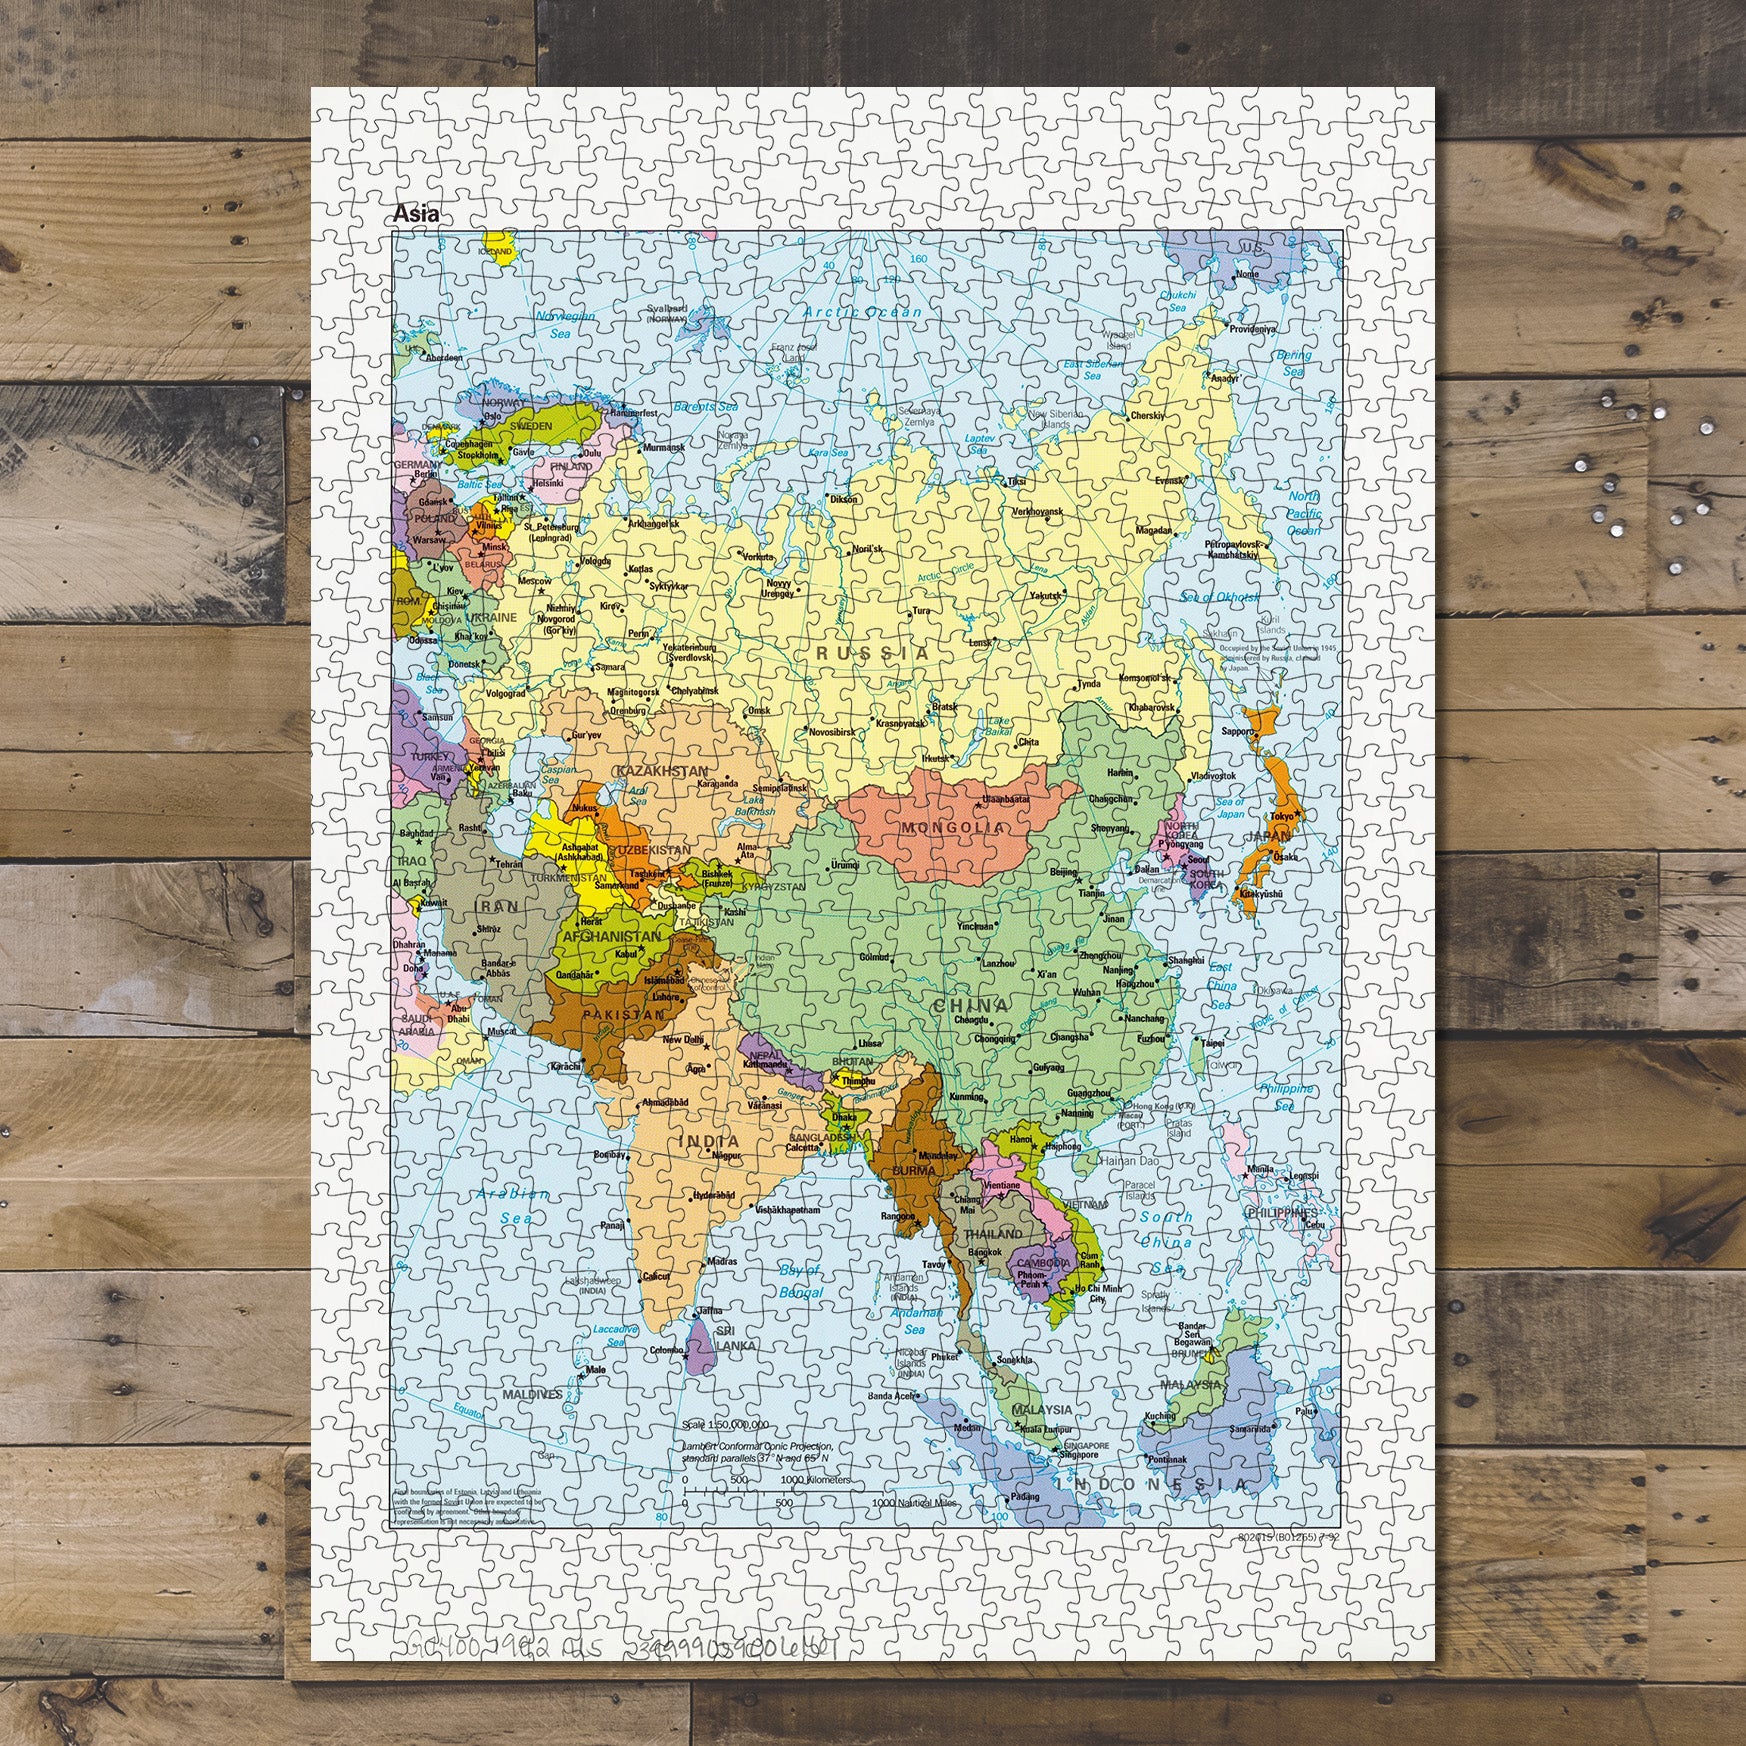 1000 Piece Jigsaw Puzzle 1992 Map | Asia Shipping list no. 93-0225-P. "802015 